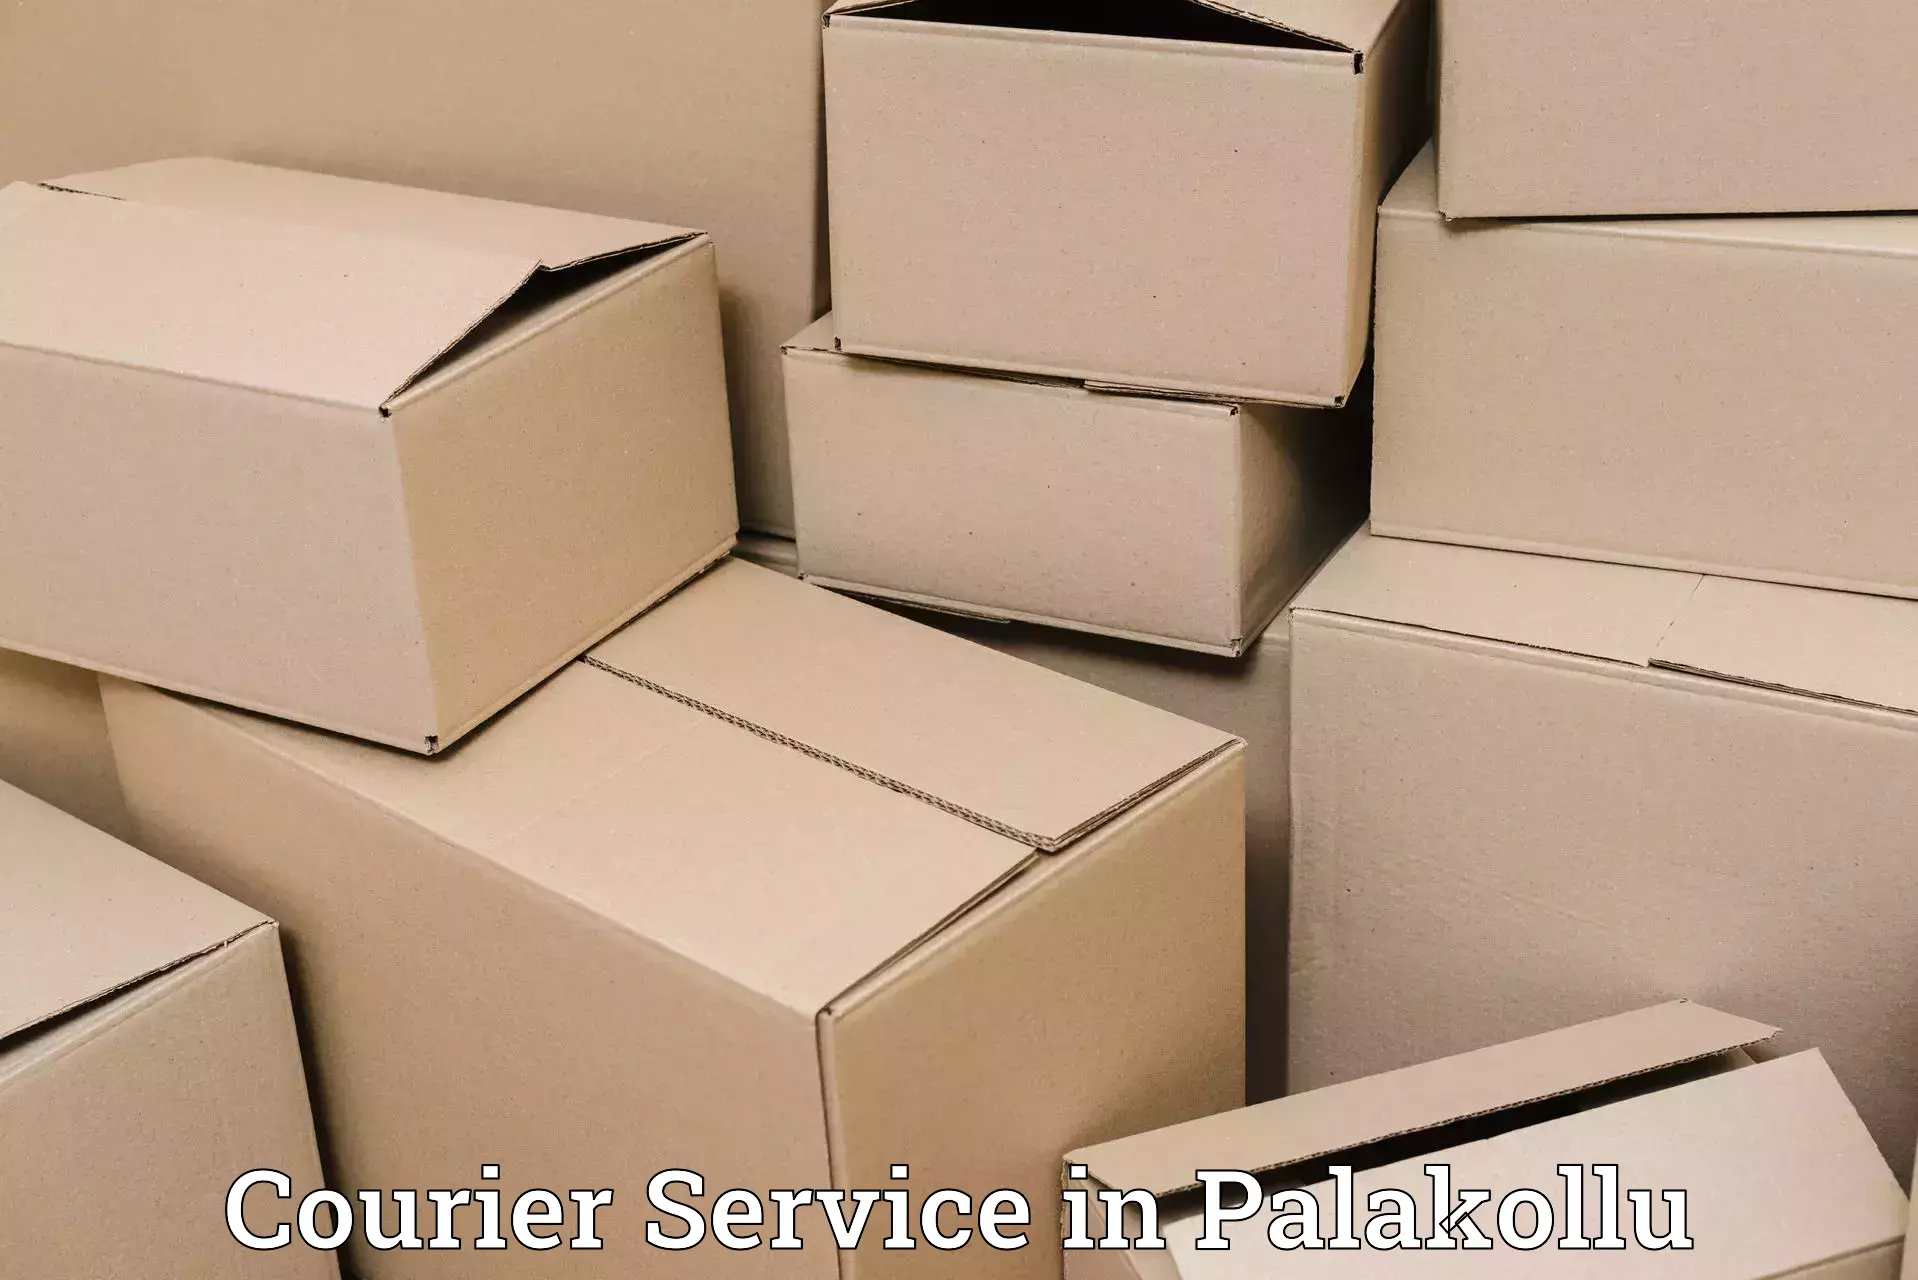 Small parcel delivery in Palakollu